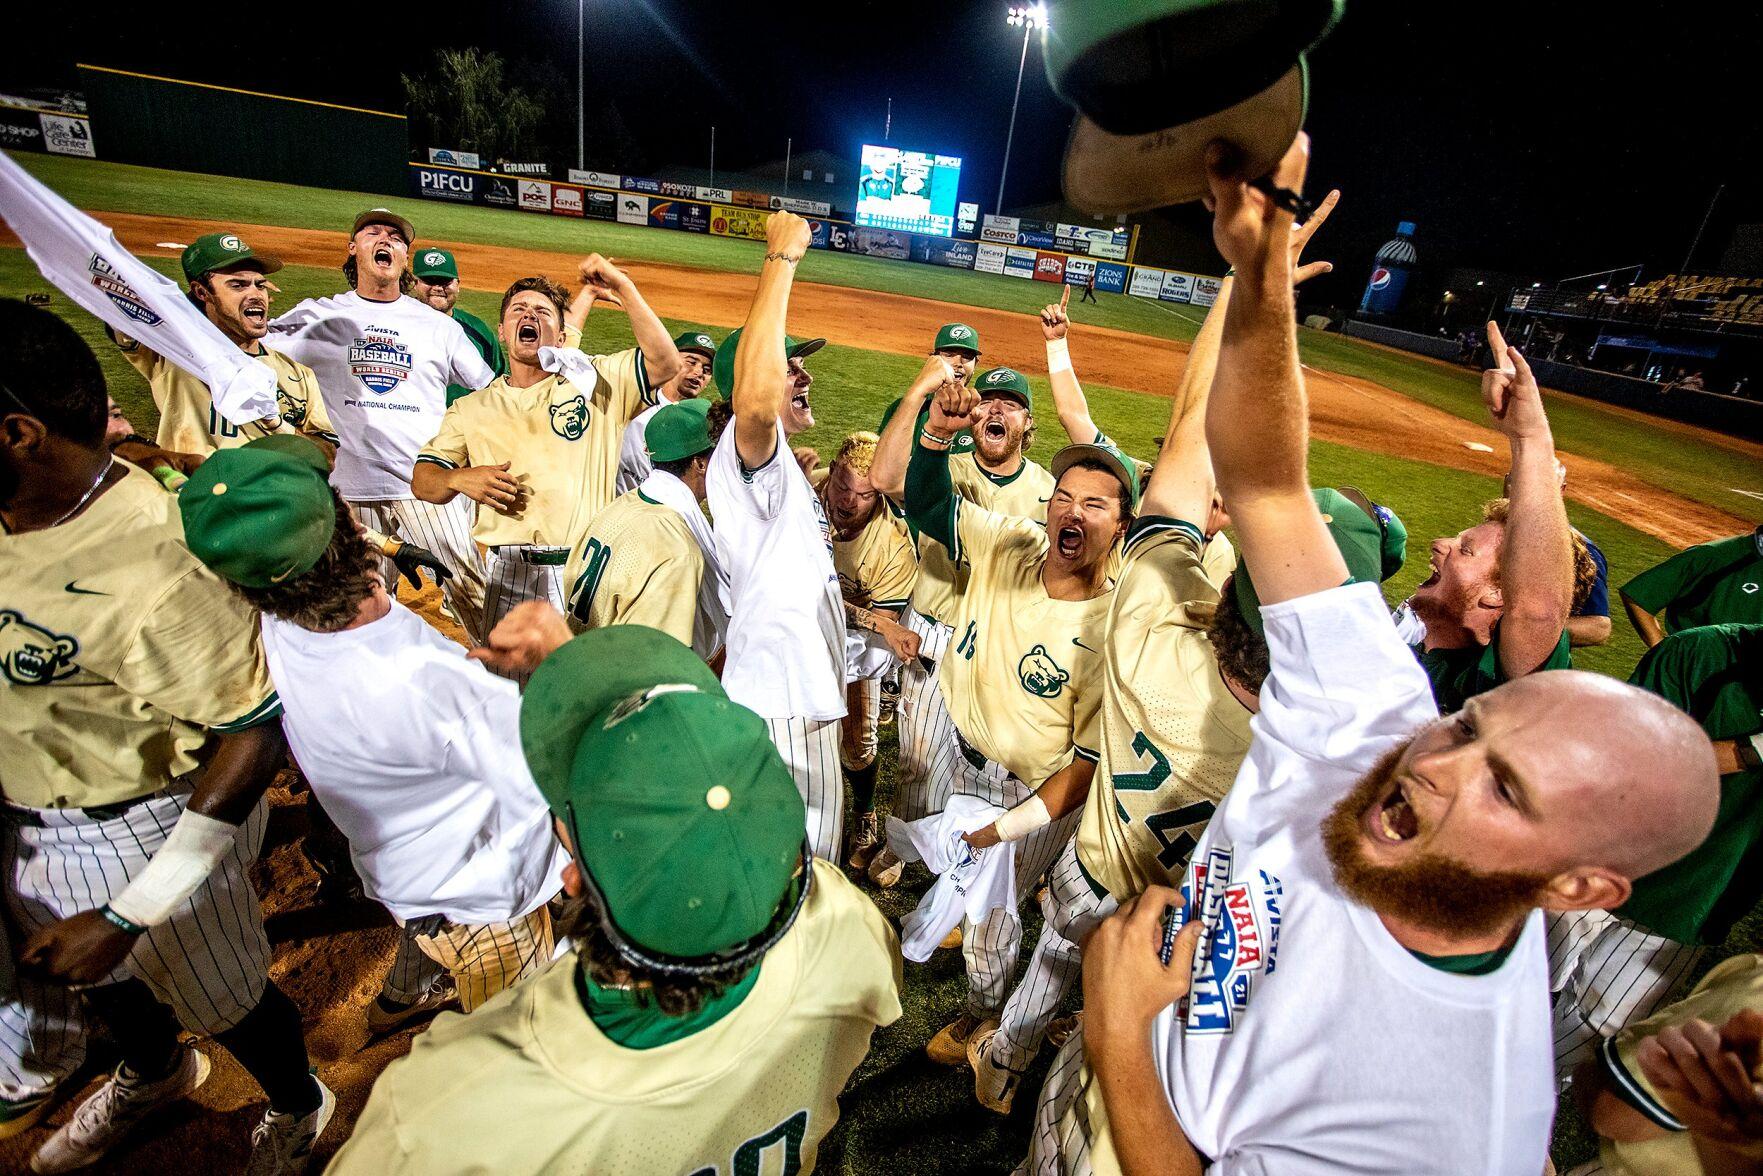 College wins NAIA World Series for first baseball